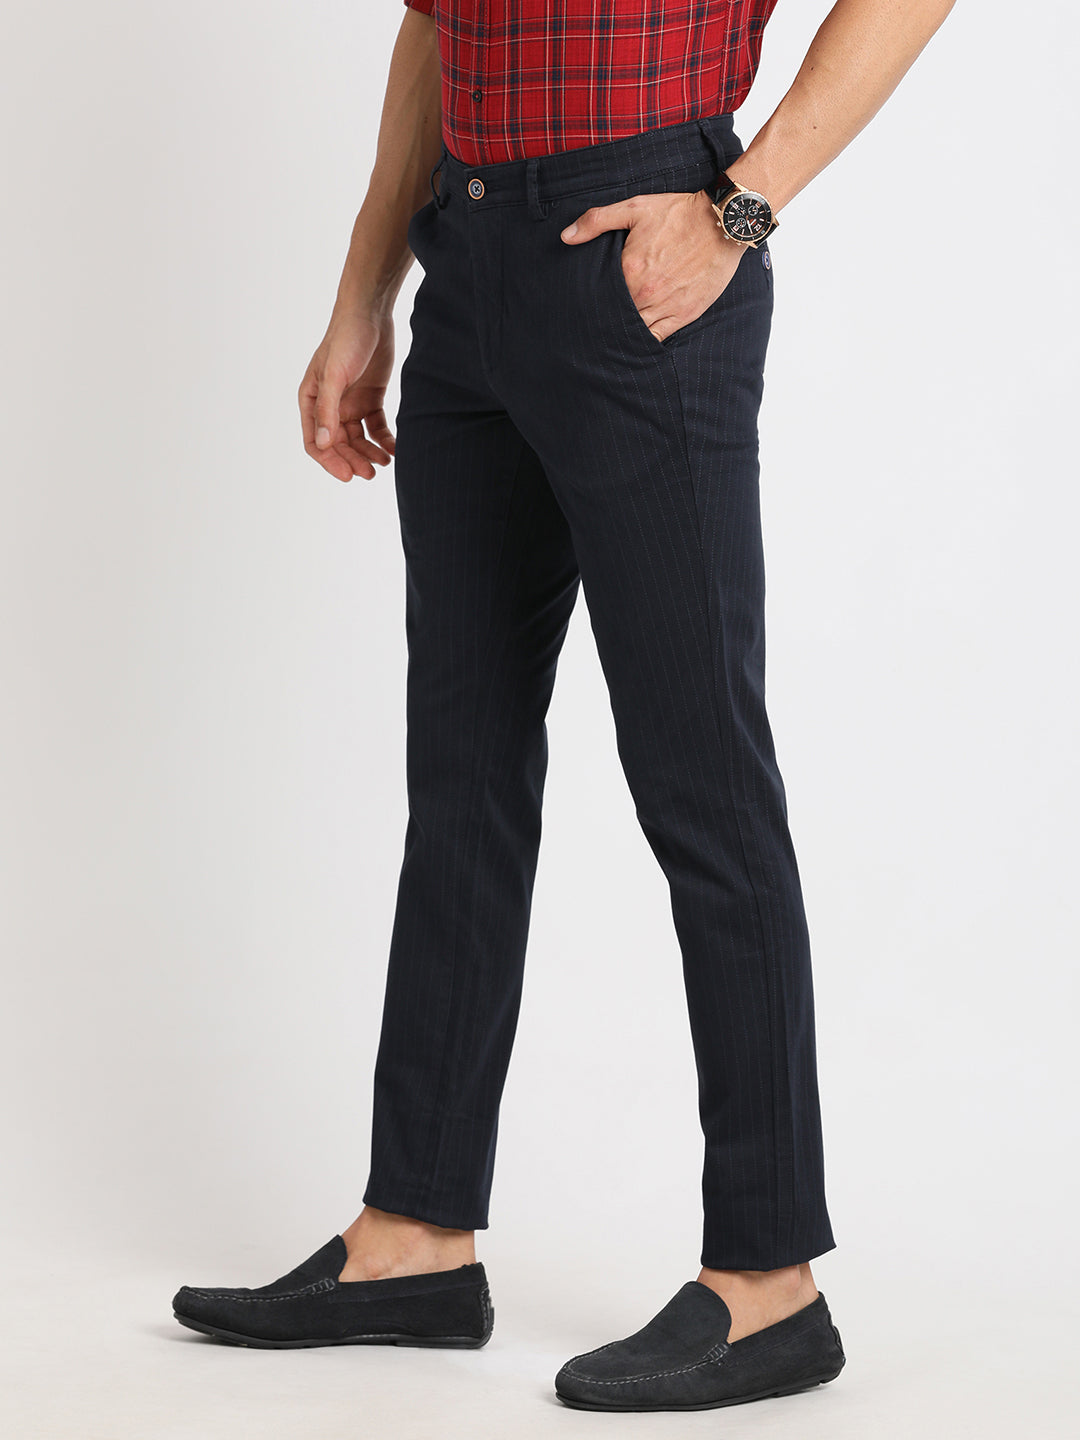 Cotton Stretch Navy Printed Narrow Fit Flat Front Casual Trouser